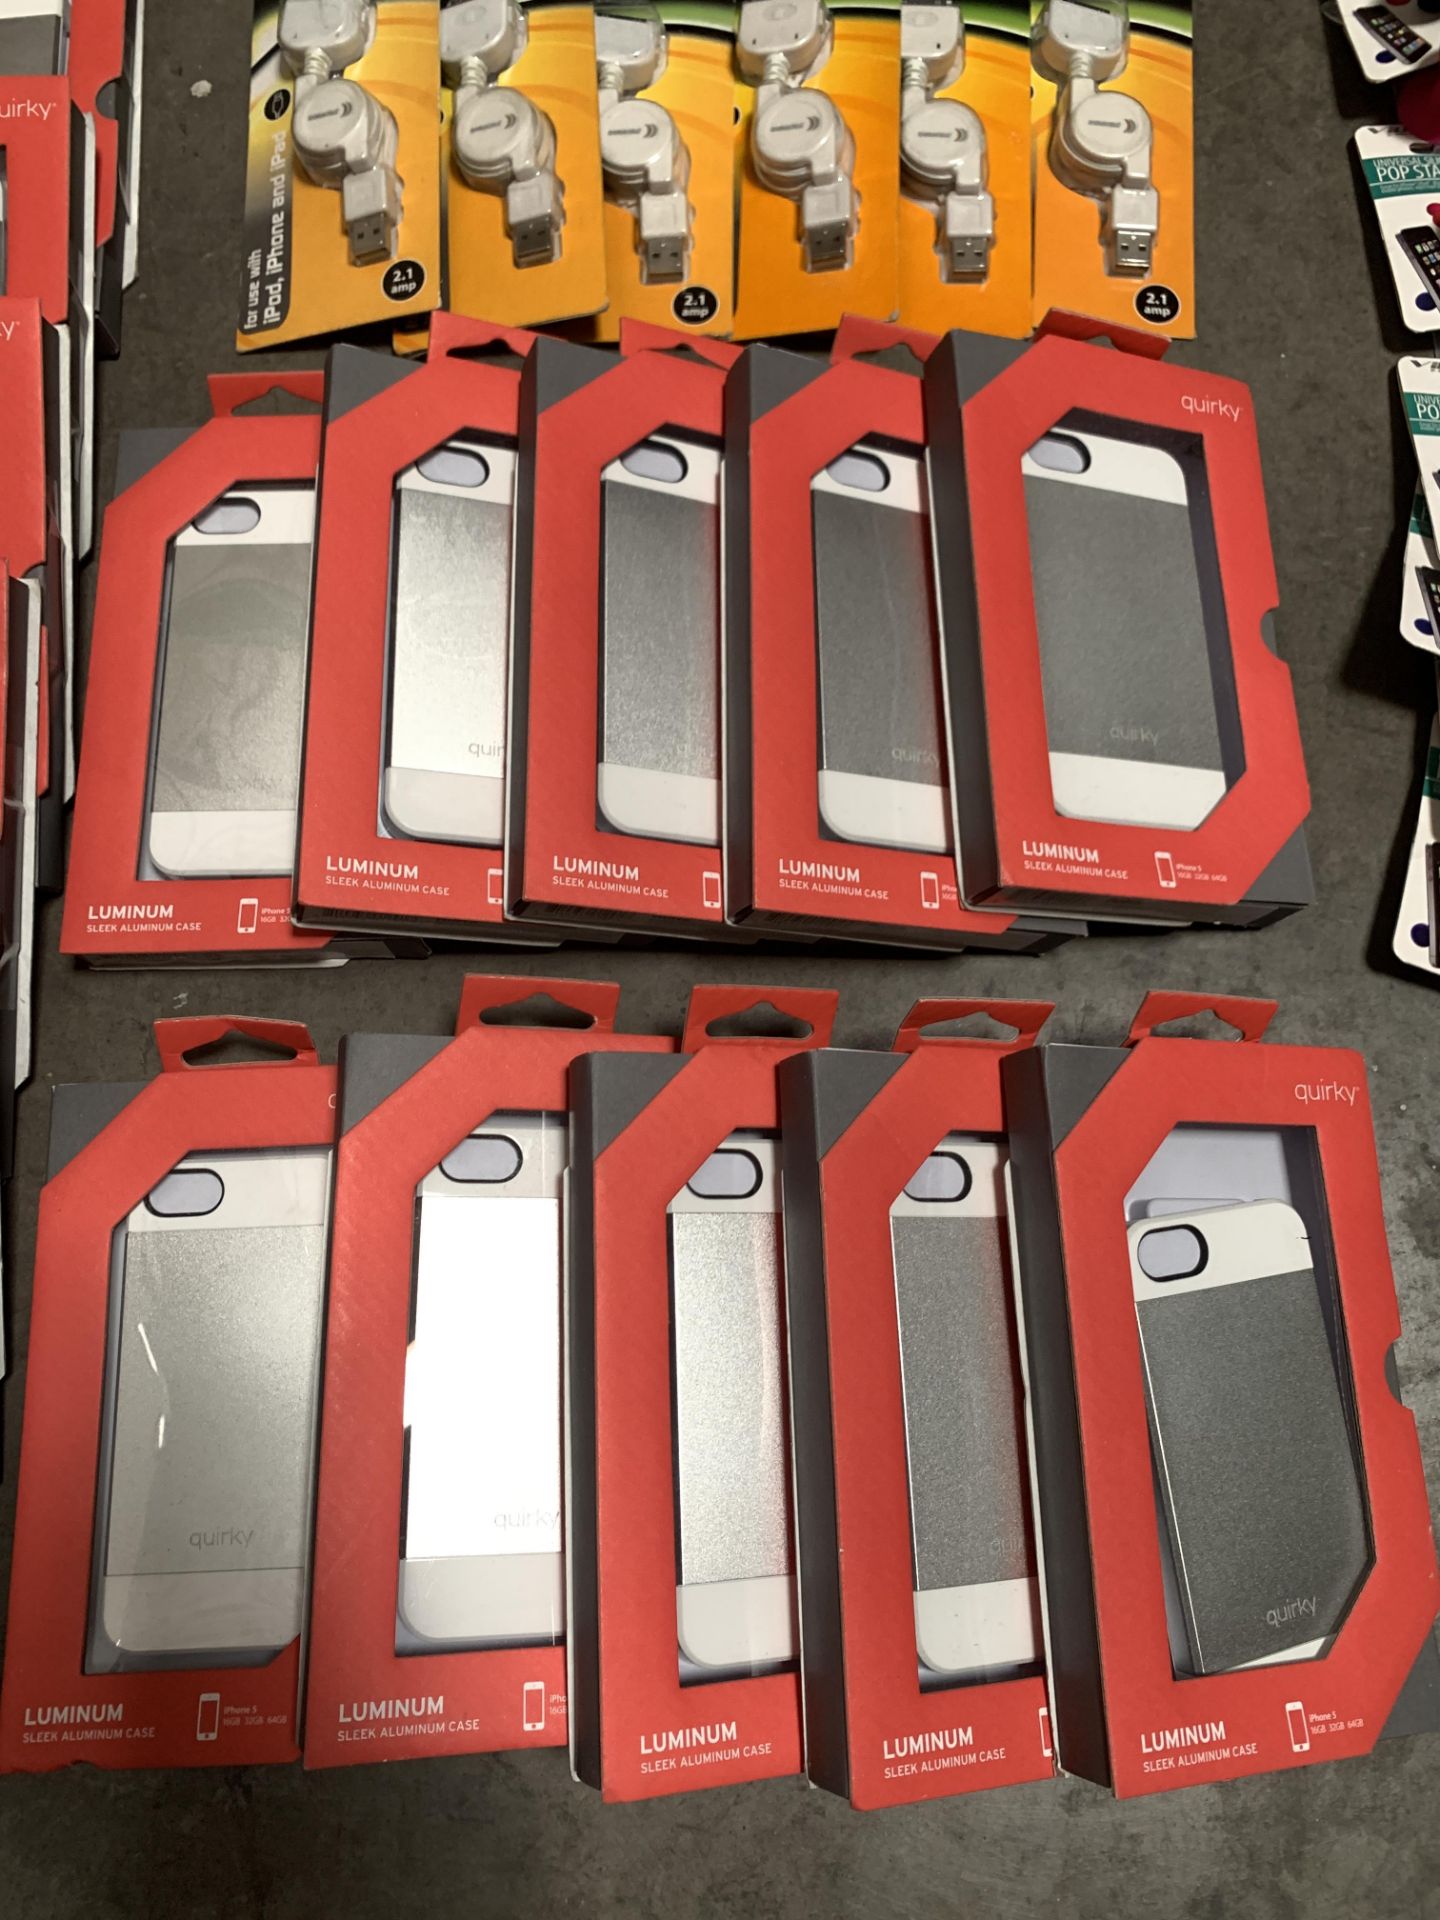 Lot of 34 Phone Cases and Accessories, Including iPhone cases, iPhone stands, and Chargers - Image 3 of 4